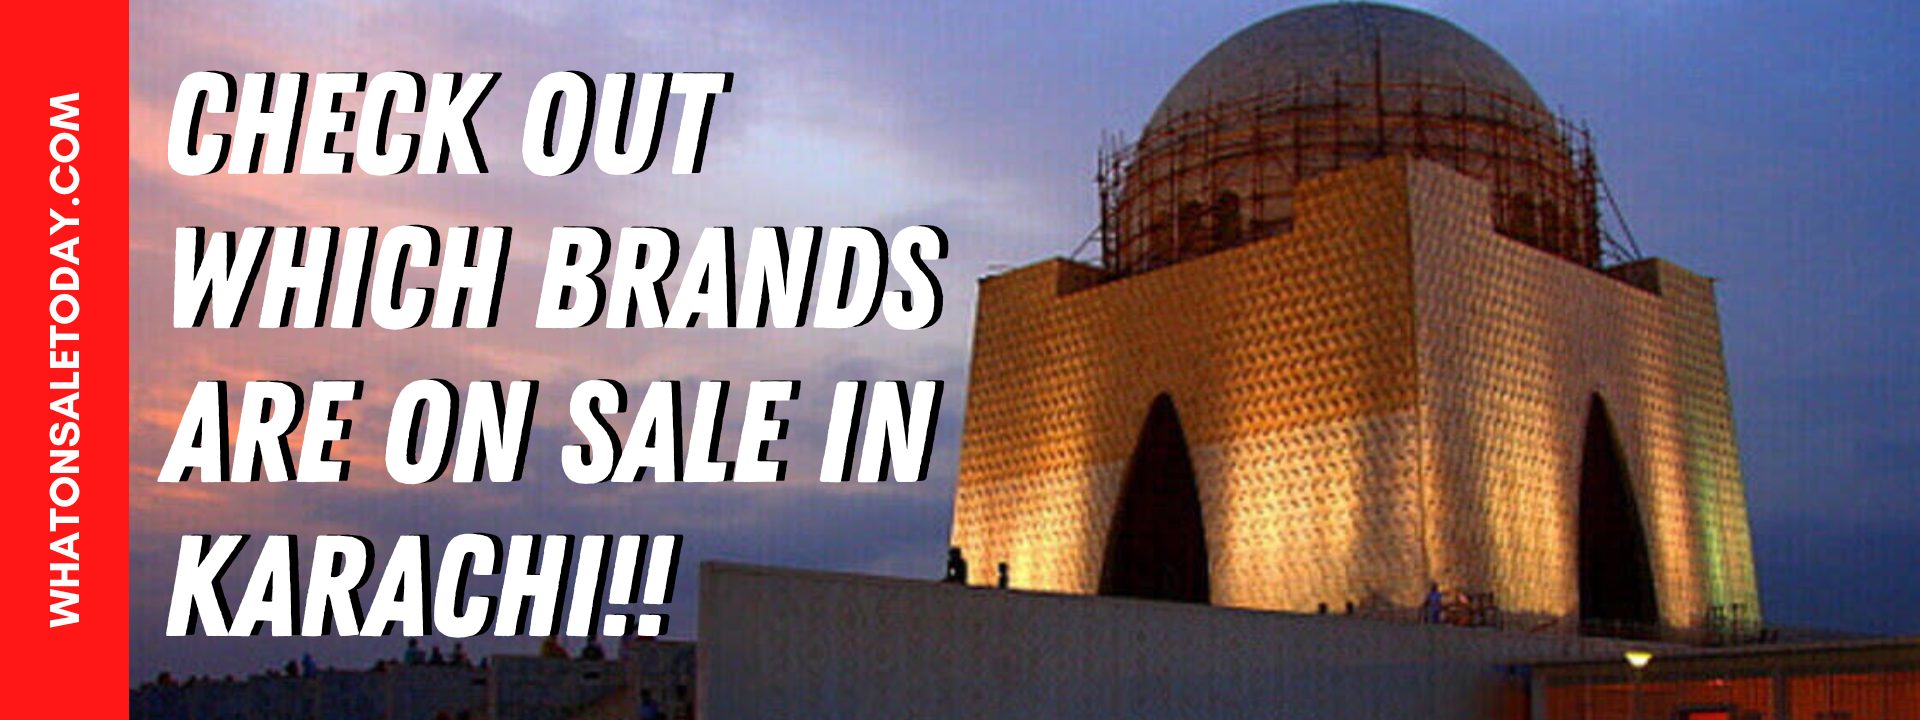 CHECK OUT WHICH BRANDS ARE on SALE in KARACHI